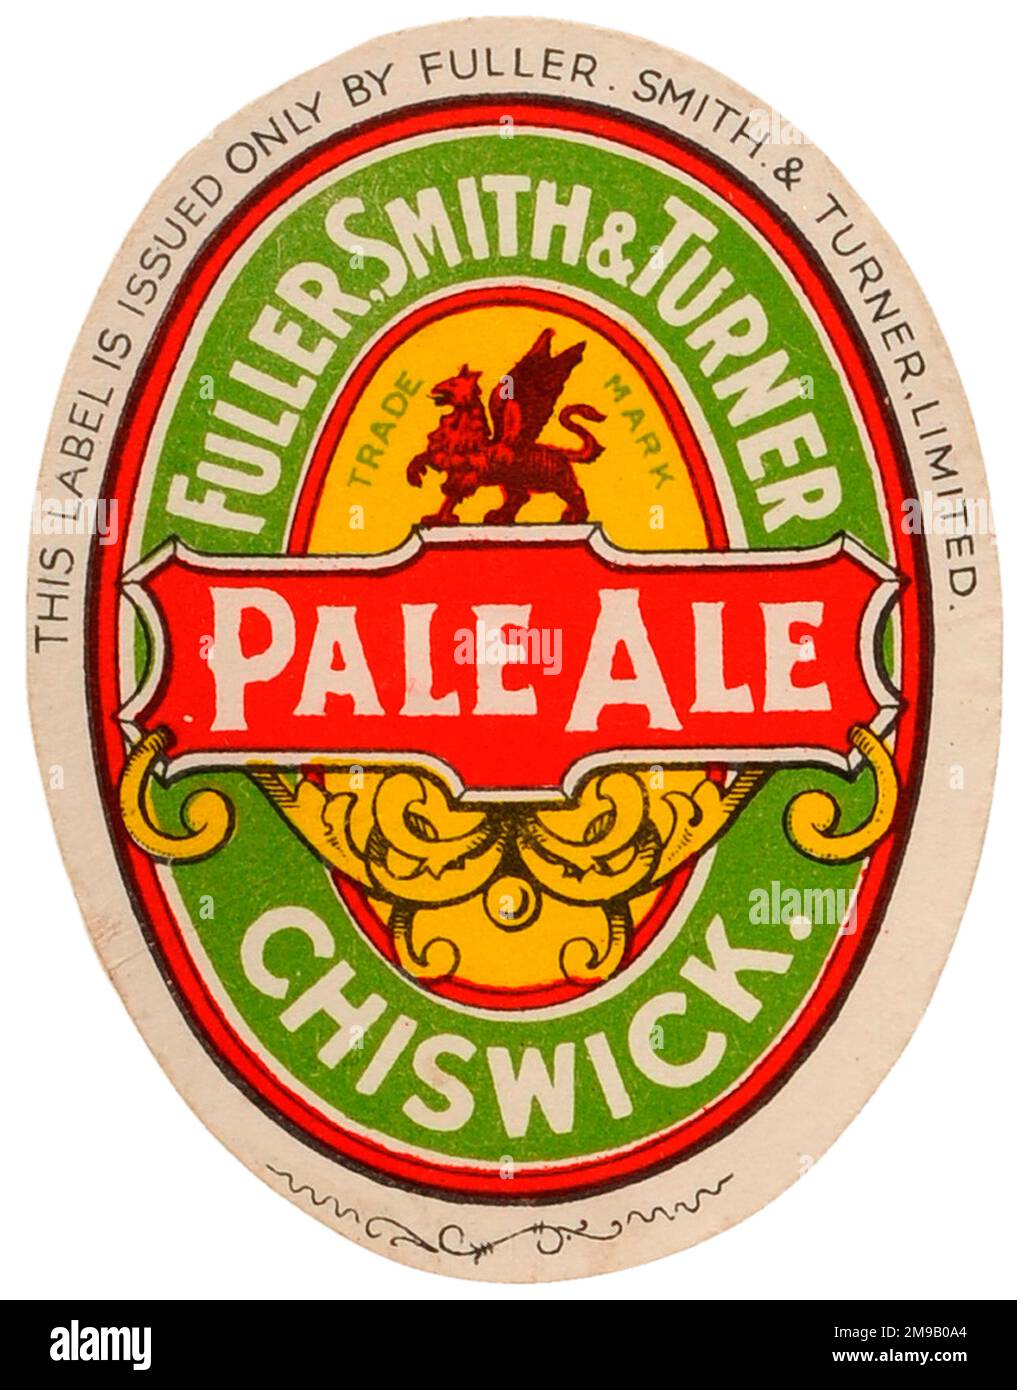 Fuller, Smith & Turner Pale Ale Stock Photo